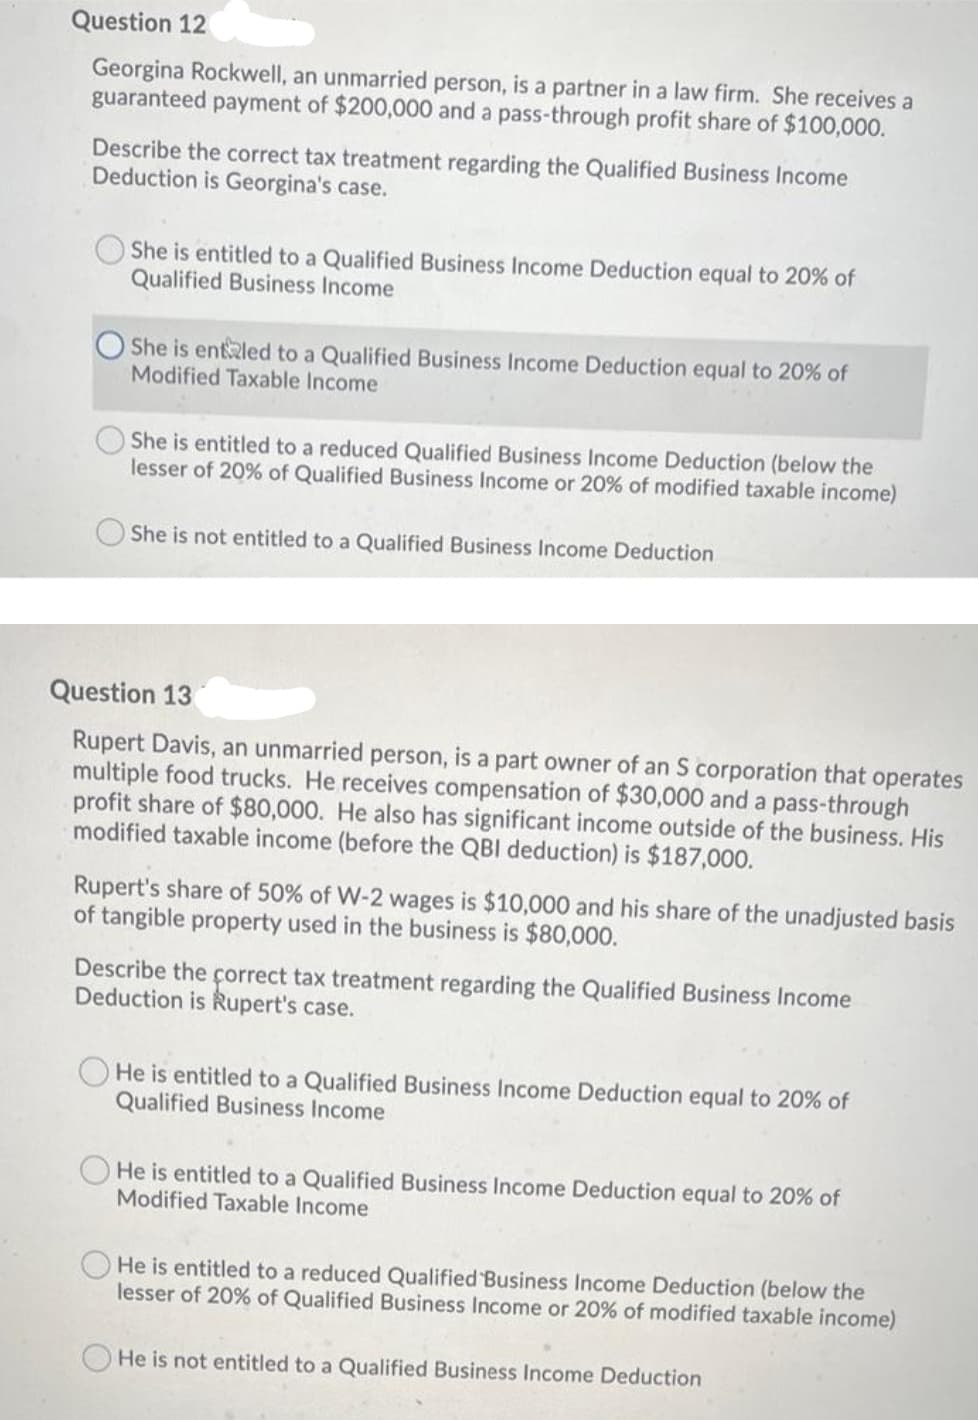 Question 12
Georgina Rockwell, an unmarried person, is a partner in a law firm. She receives a
guaranteed payment of $200,000 and a pass-through profit share of $100,000.
Describe the correct tax treatment regarding the Qualified Business Income
Deduction is Georgina's case.
She is entitled to a Qualified Business Income Deduction equal to 20% of
Qualified Business Income
She is entled to a Qualified Business Income Deduction equal to 20% of
Modified Taxable Income
She is entitled to a reduced Qualified Business Income Deduction (below the
lesser of 20% of Qualified Business Income or 20% of modified taxable income)
She is not entitled to a Qualified Business Income Deduction
Question 13
Rupert Davis, an unmarried person, is a part owner of an S corporation that operates
multiple food trucks. He receives compensation of $30,000 and a pass-through
profit share of $80,000. He also has significant income outside of the business. His
modified taxable income (before the QBI deduction) is $187,000.
Rupert's share of 50% of W-2 wages is $10,000 and his share of the unadjusted basis
of tangible property used in the business is $80,000.
Describe the çorrect tax treatment regarding the Qualified Business Income
Deduction is Rupert's case.
O He is entitled to a Qualified Business Income Deduction equal to 20% of
Qualified Business Income
He is entitled to a Qualified Business Income Deduction equal to 20% of
Modified Taxable Income
He is entitled to a reduced Qualified Business Income Deduction (below the
lesser of 20% of Qualified Business Income or 20% of modified taxable income)
He is not entitled to a Qualified Business Income Deduction
